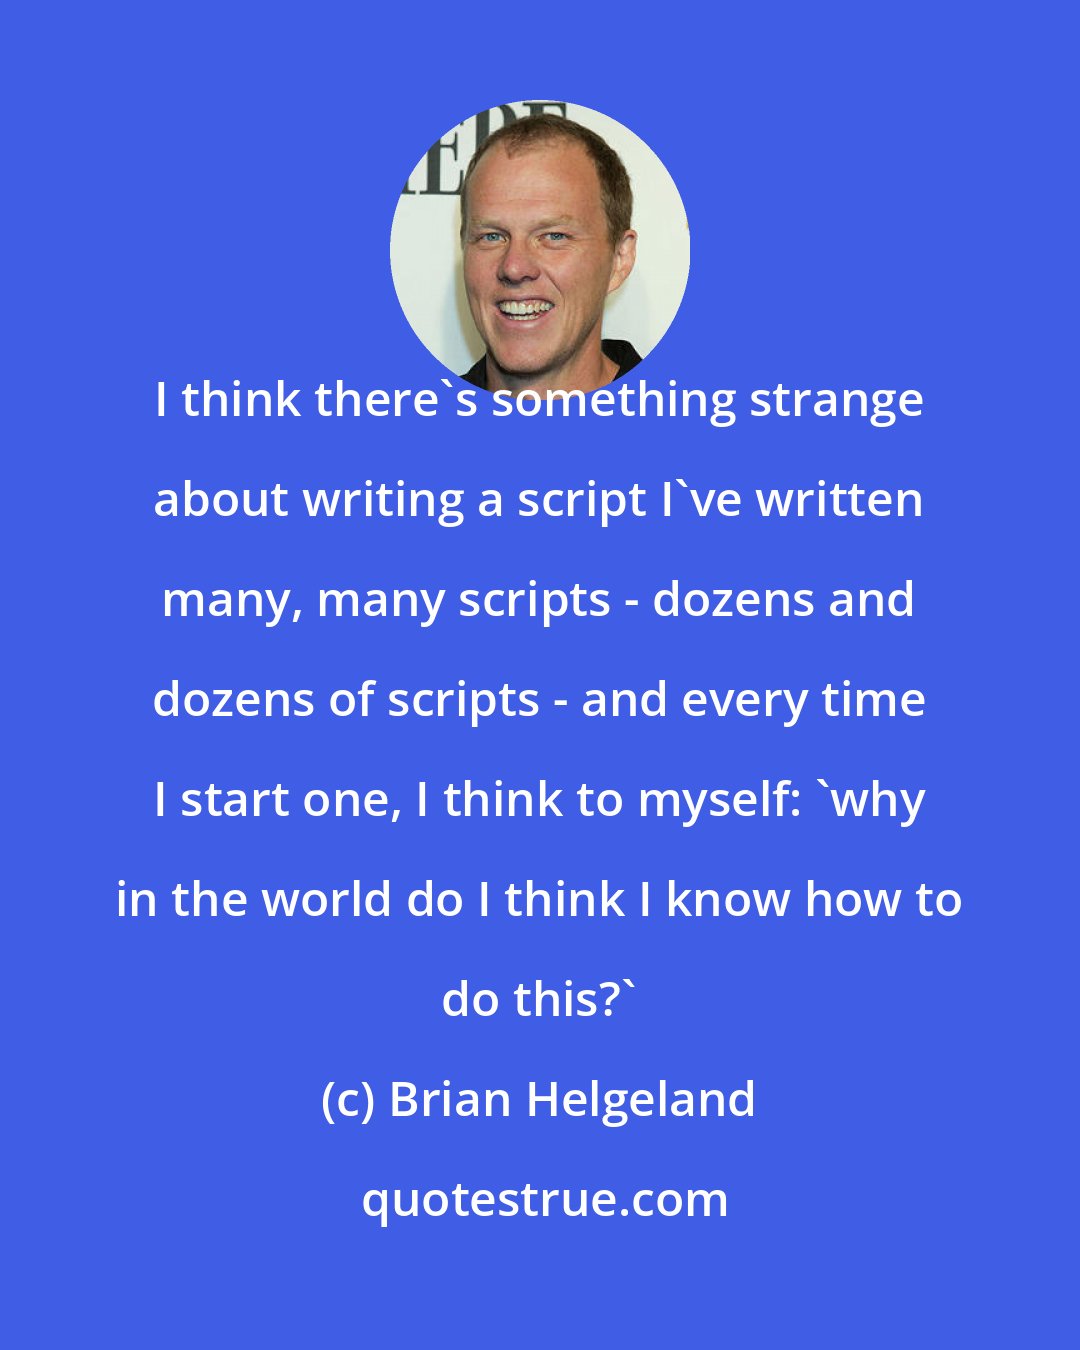 Brian Helgeland: I think there's something strange about writing a script I've written many, many scripts - dozens and dozens of scripts - and every time I start one, I think to myself: 'why in the world do I think I know how to do this?'